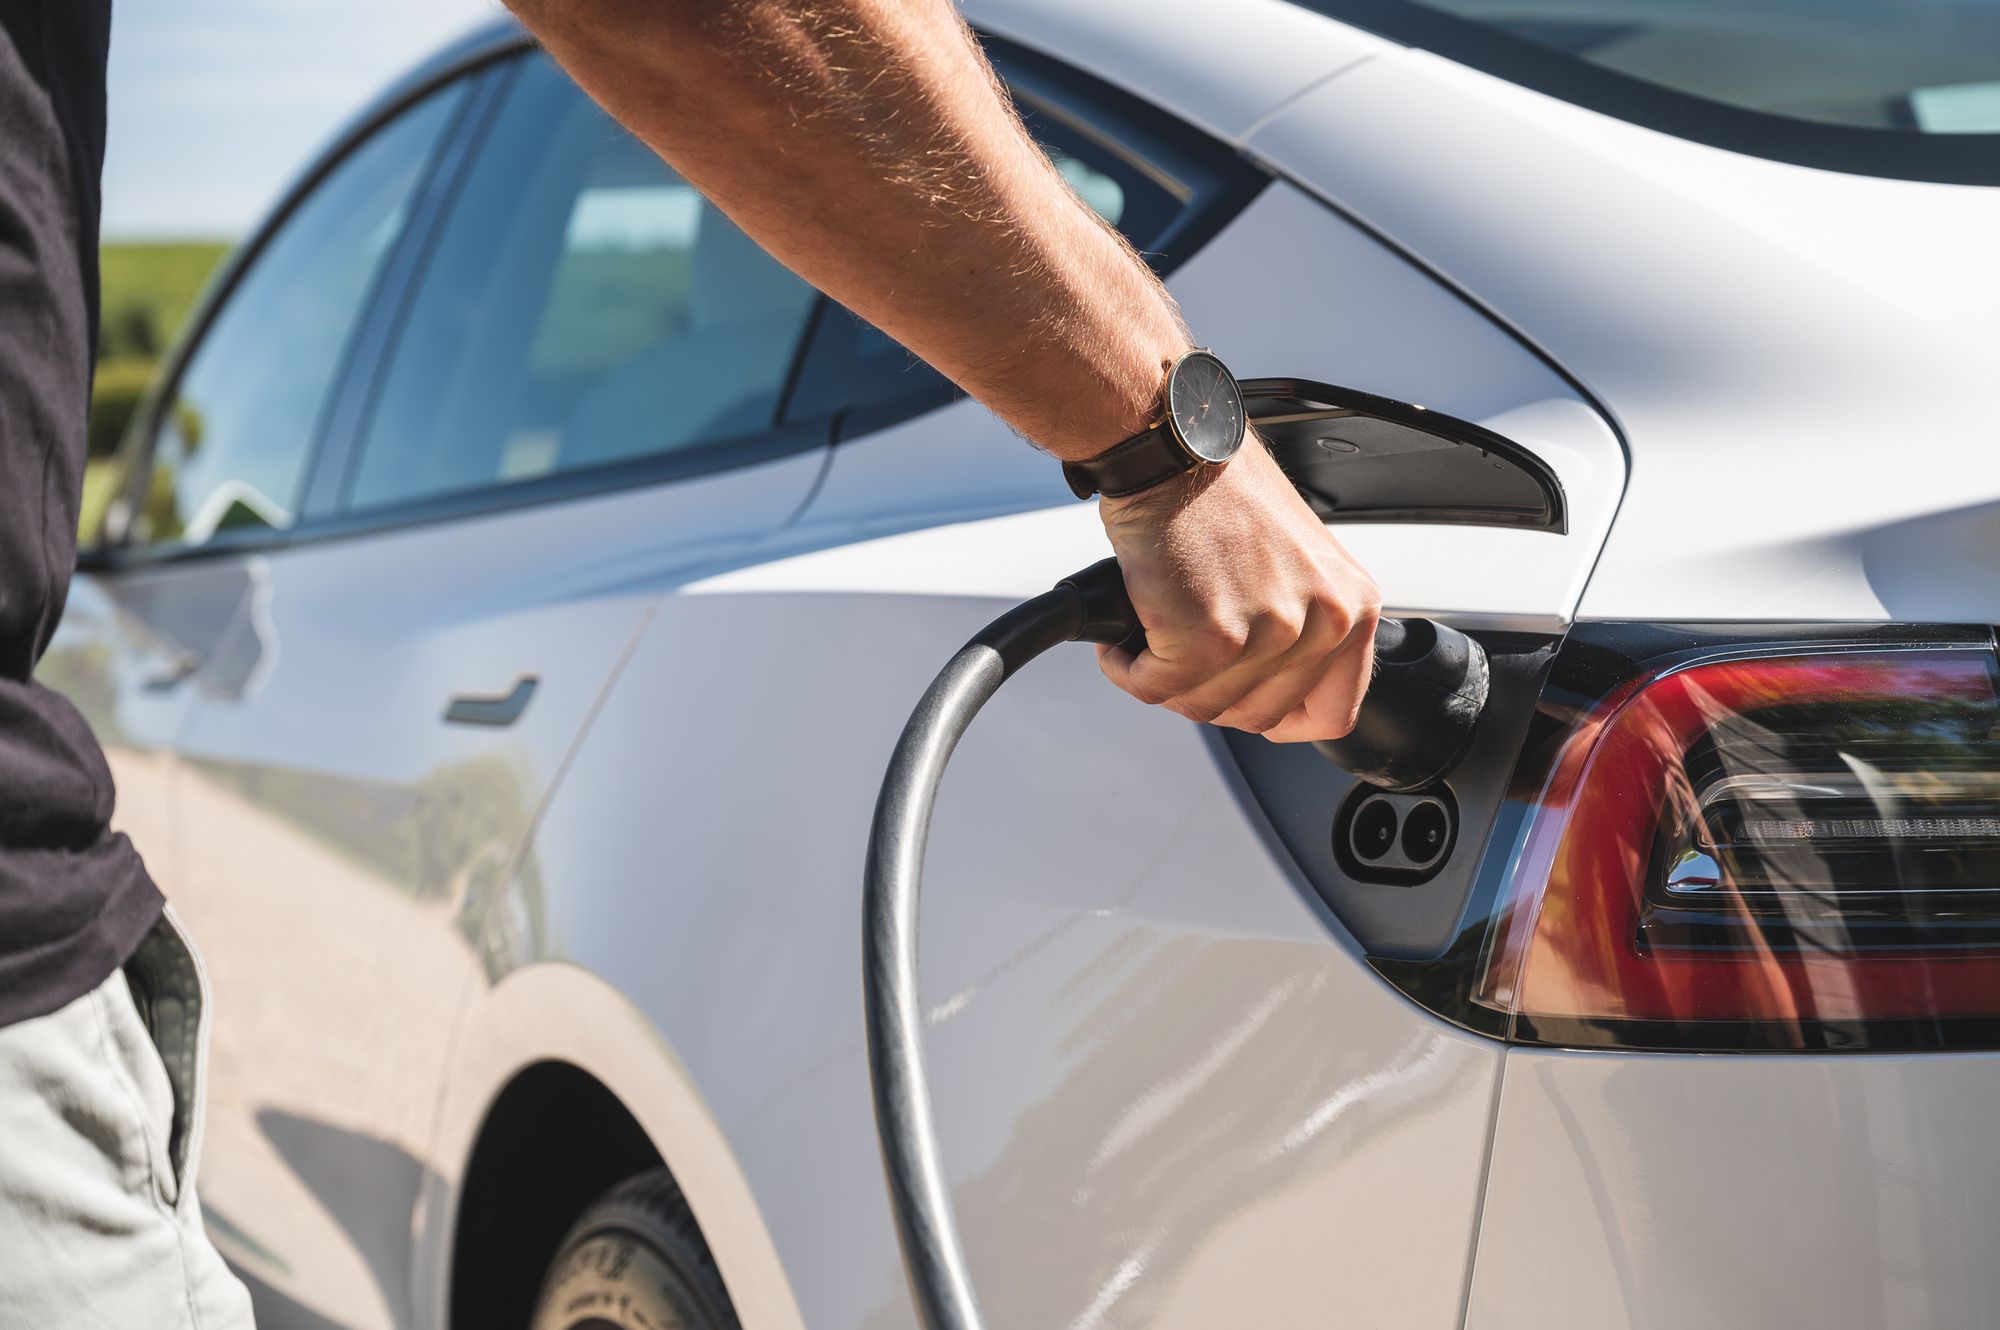 evee’s Beginners Guide to Charging Electric Cars in Australia